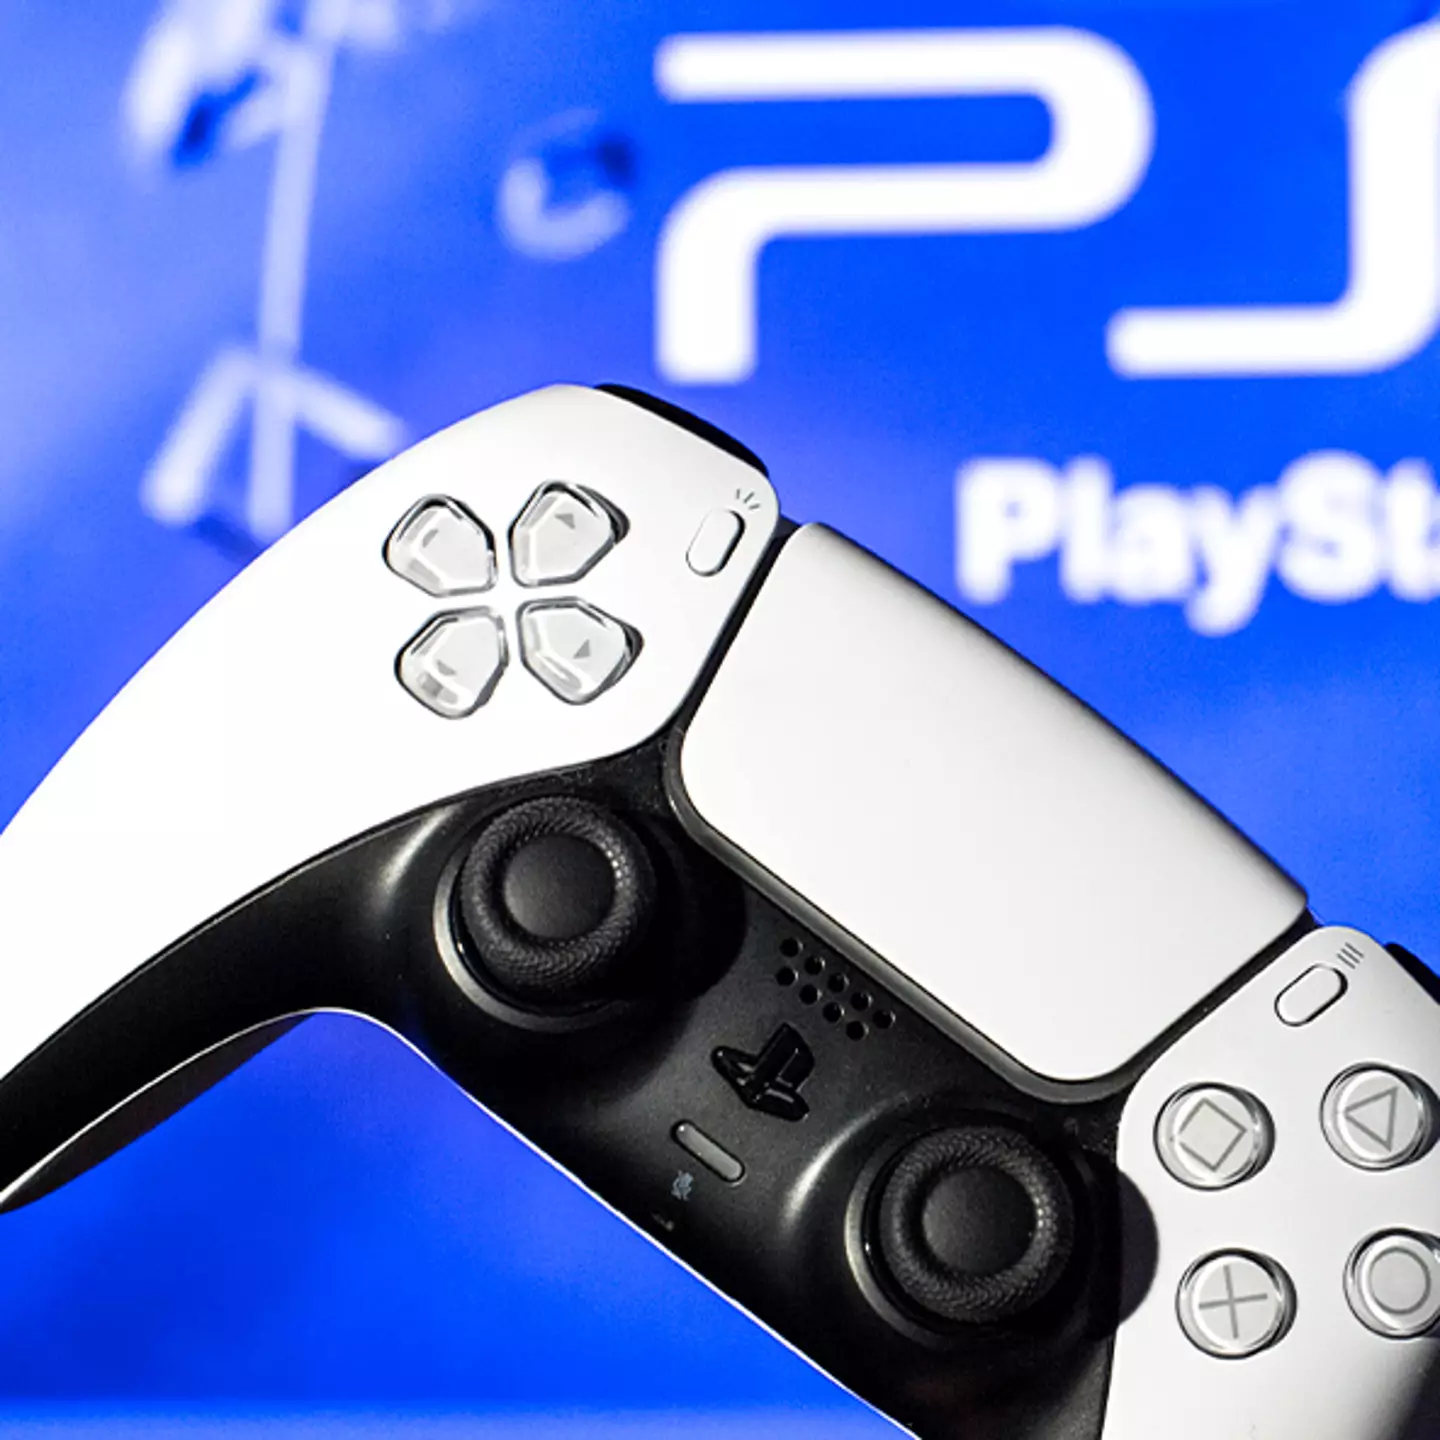 PlayStation 5 owners can earn £283 via new recycling service along with other consoles